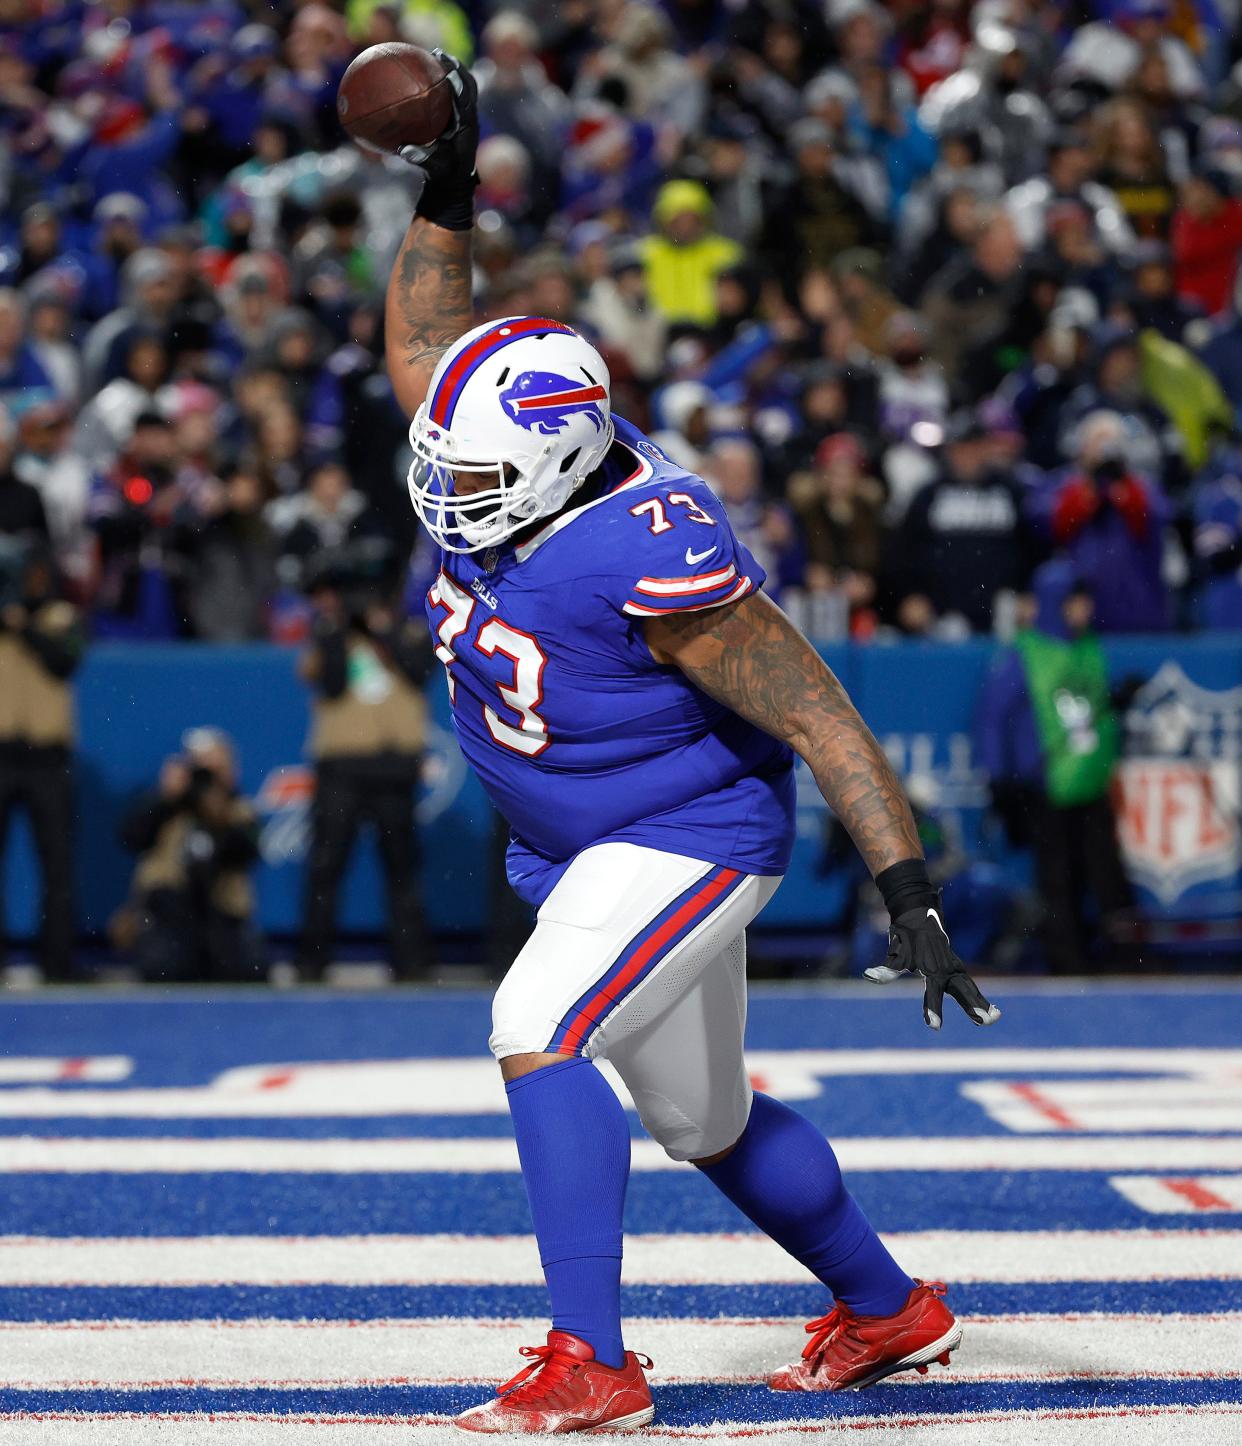 The Bills gave Dion Dawkins a three-year contract extension Monday.